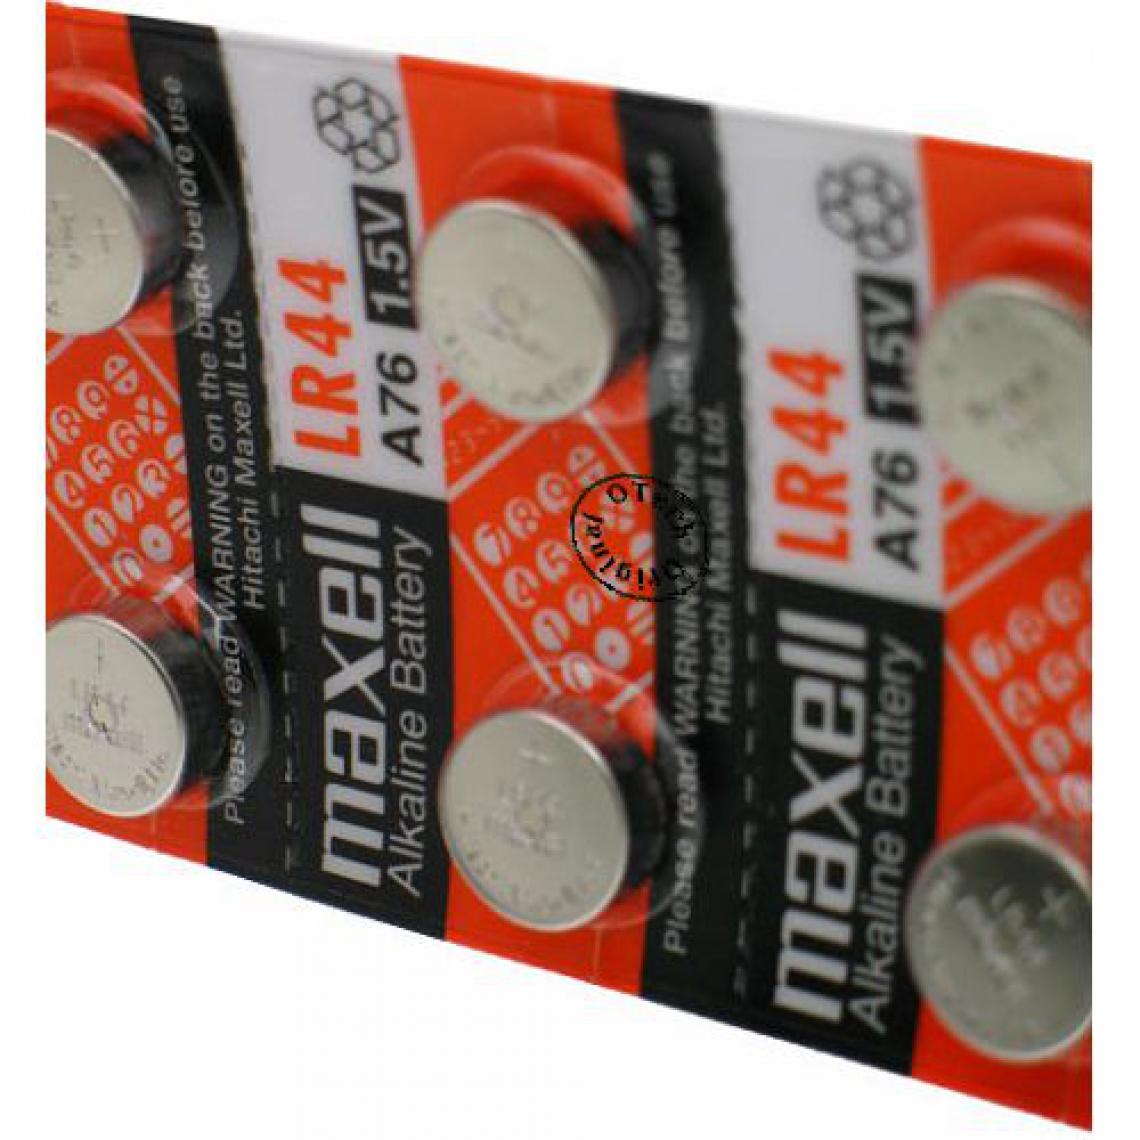 Otech - Pack de 10 piles maxell pour MAXELL SB-F9 - Piles rechargeables